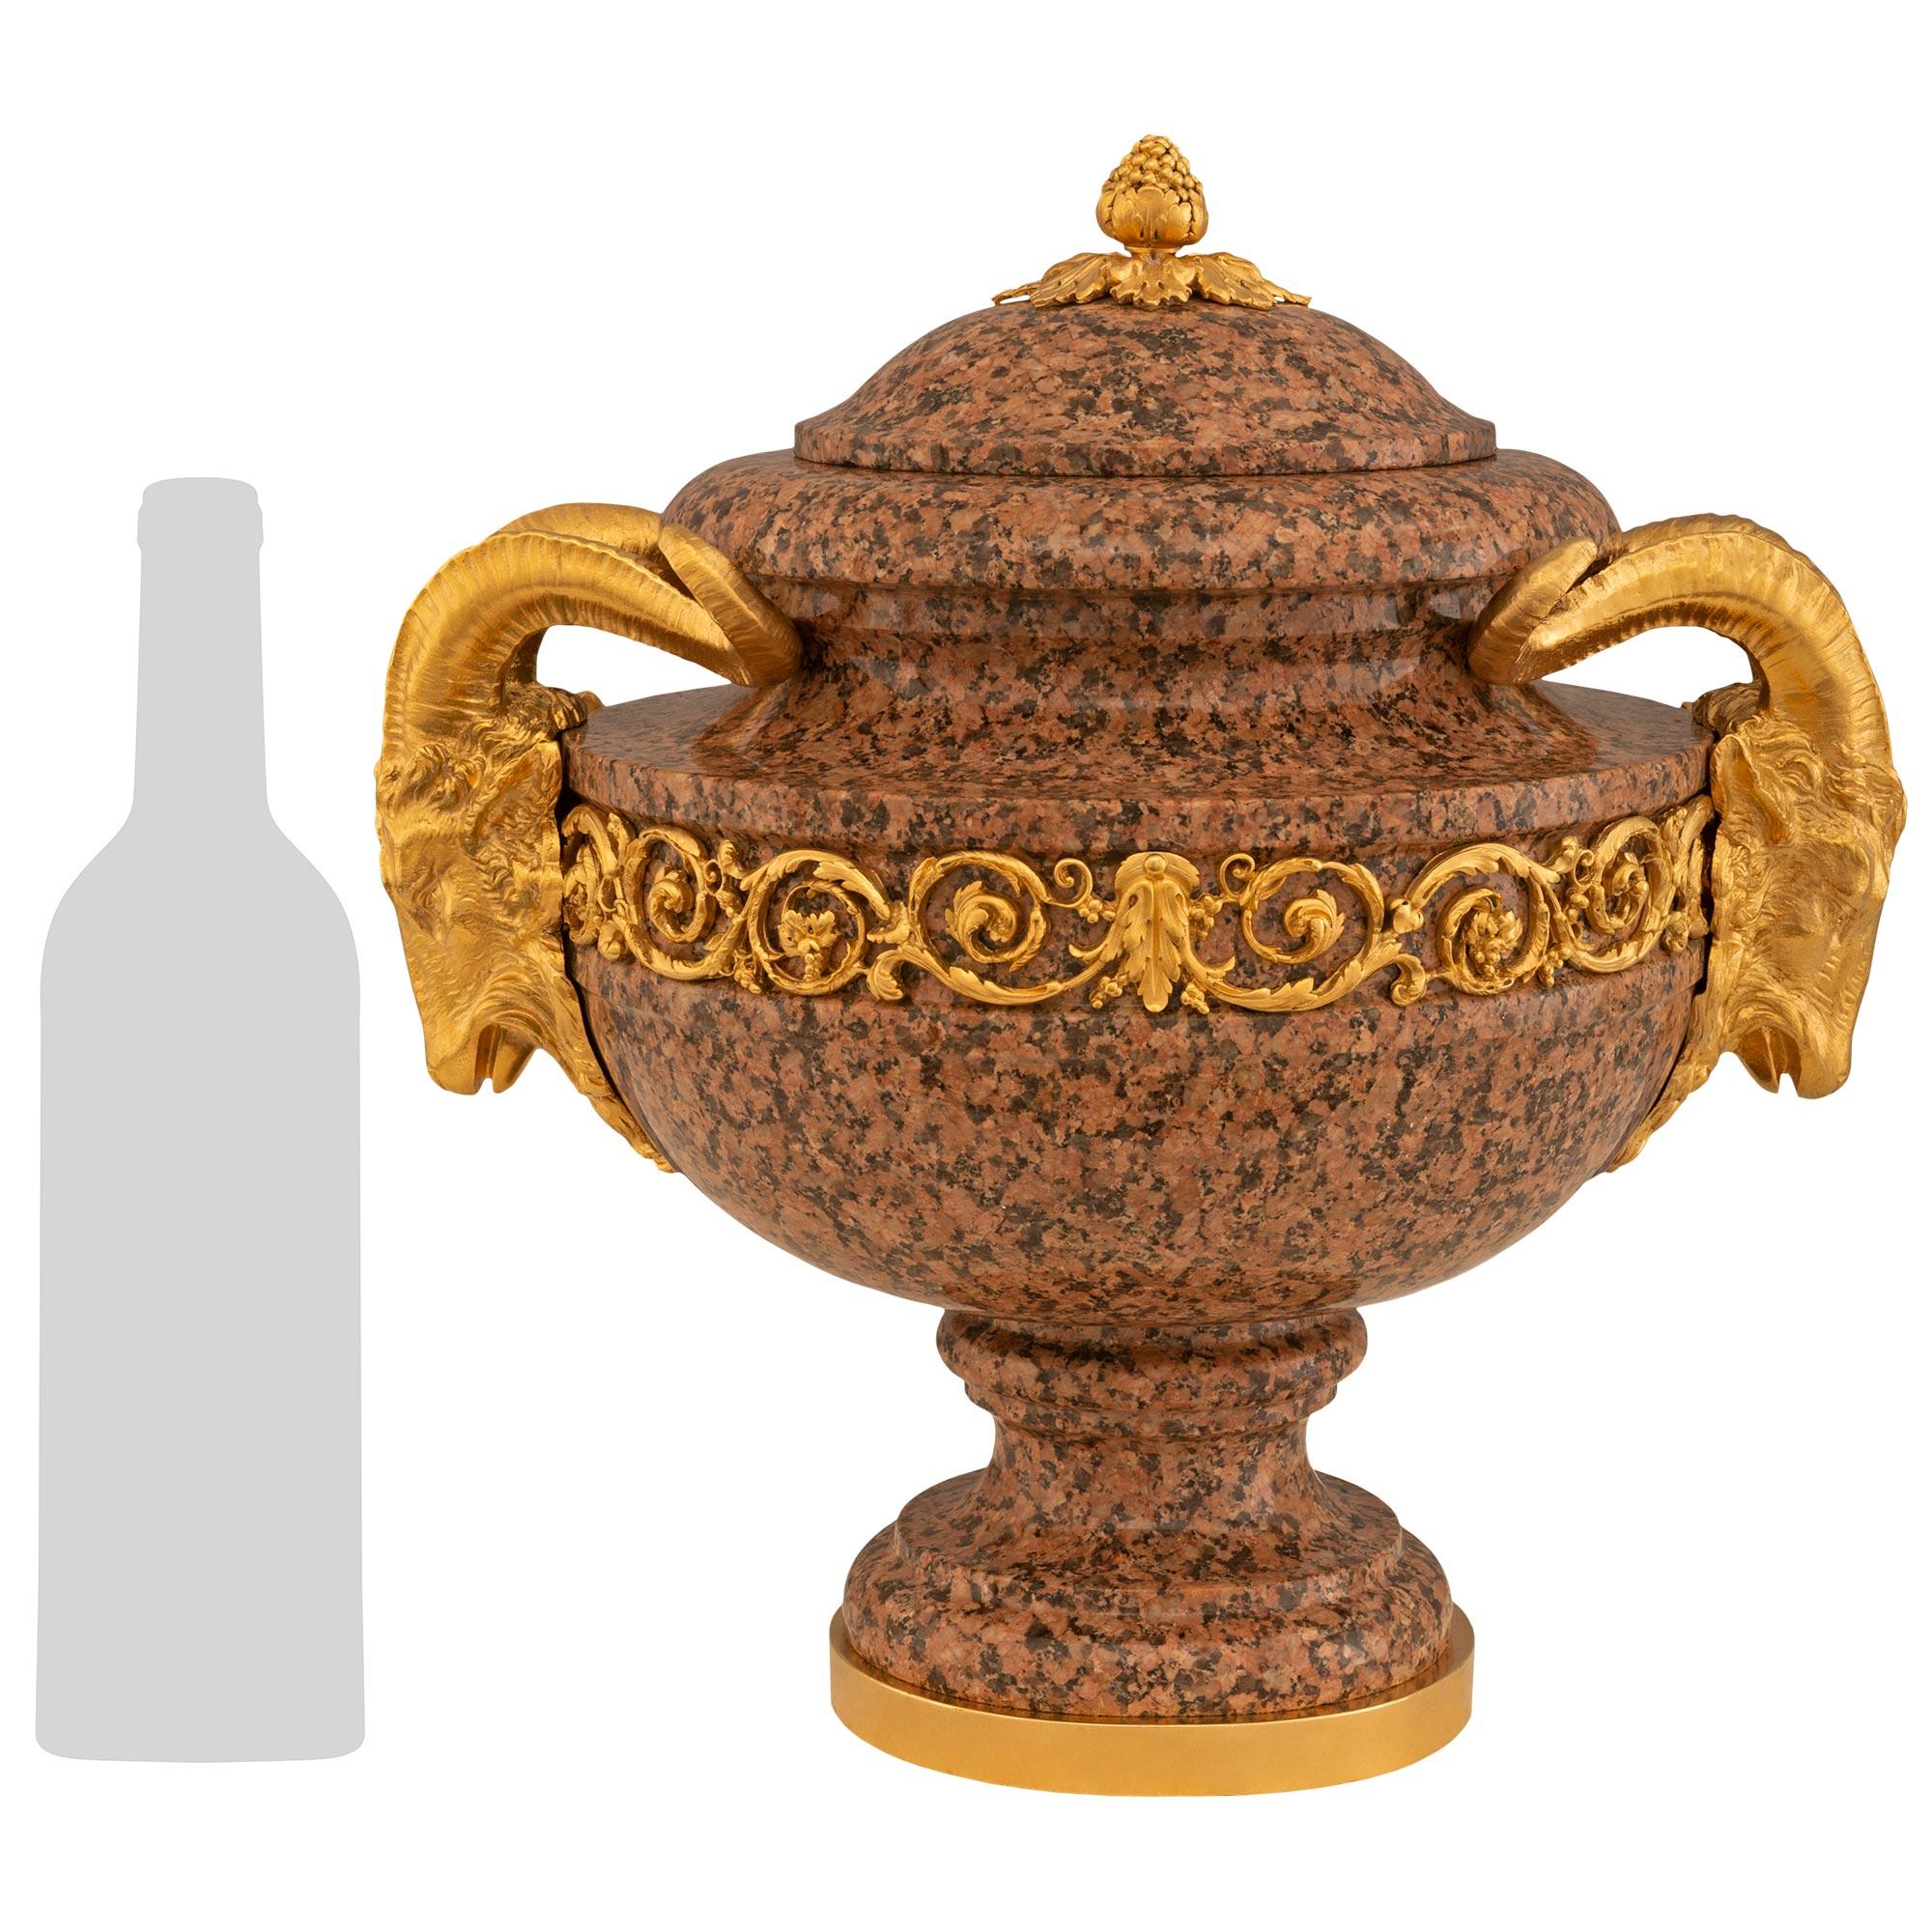 An impressive and extremely decorative pair of French 19th century Louis XVI st. pink Granite and ormolu lidded urns. The pair are raised on circular ormolu bases below the mottled Granite socle support. The urn above has a recessed carved band